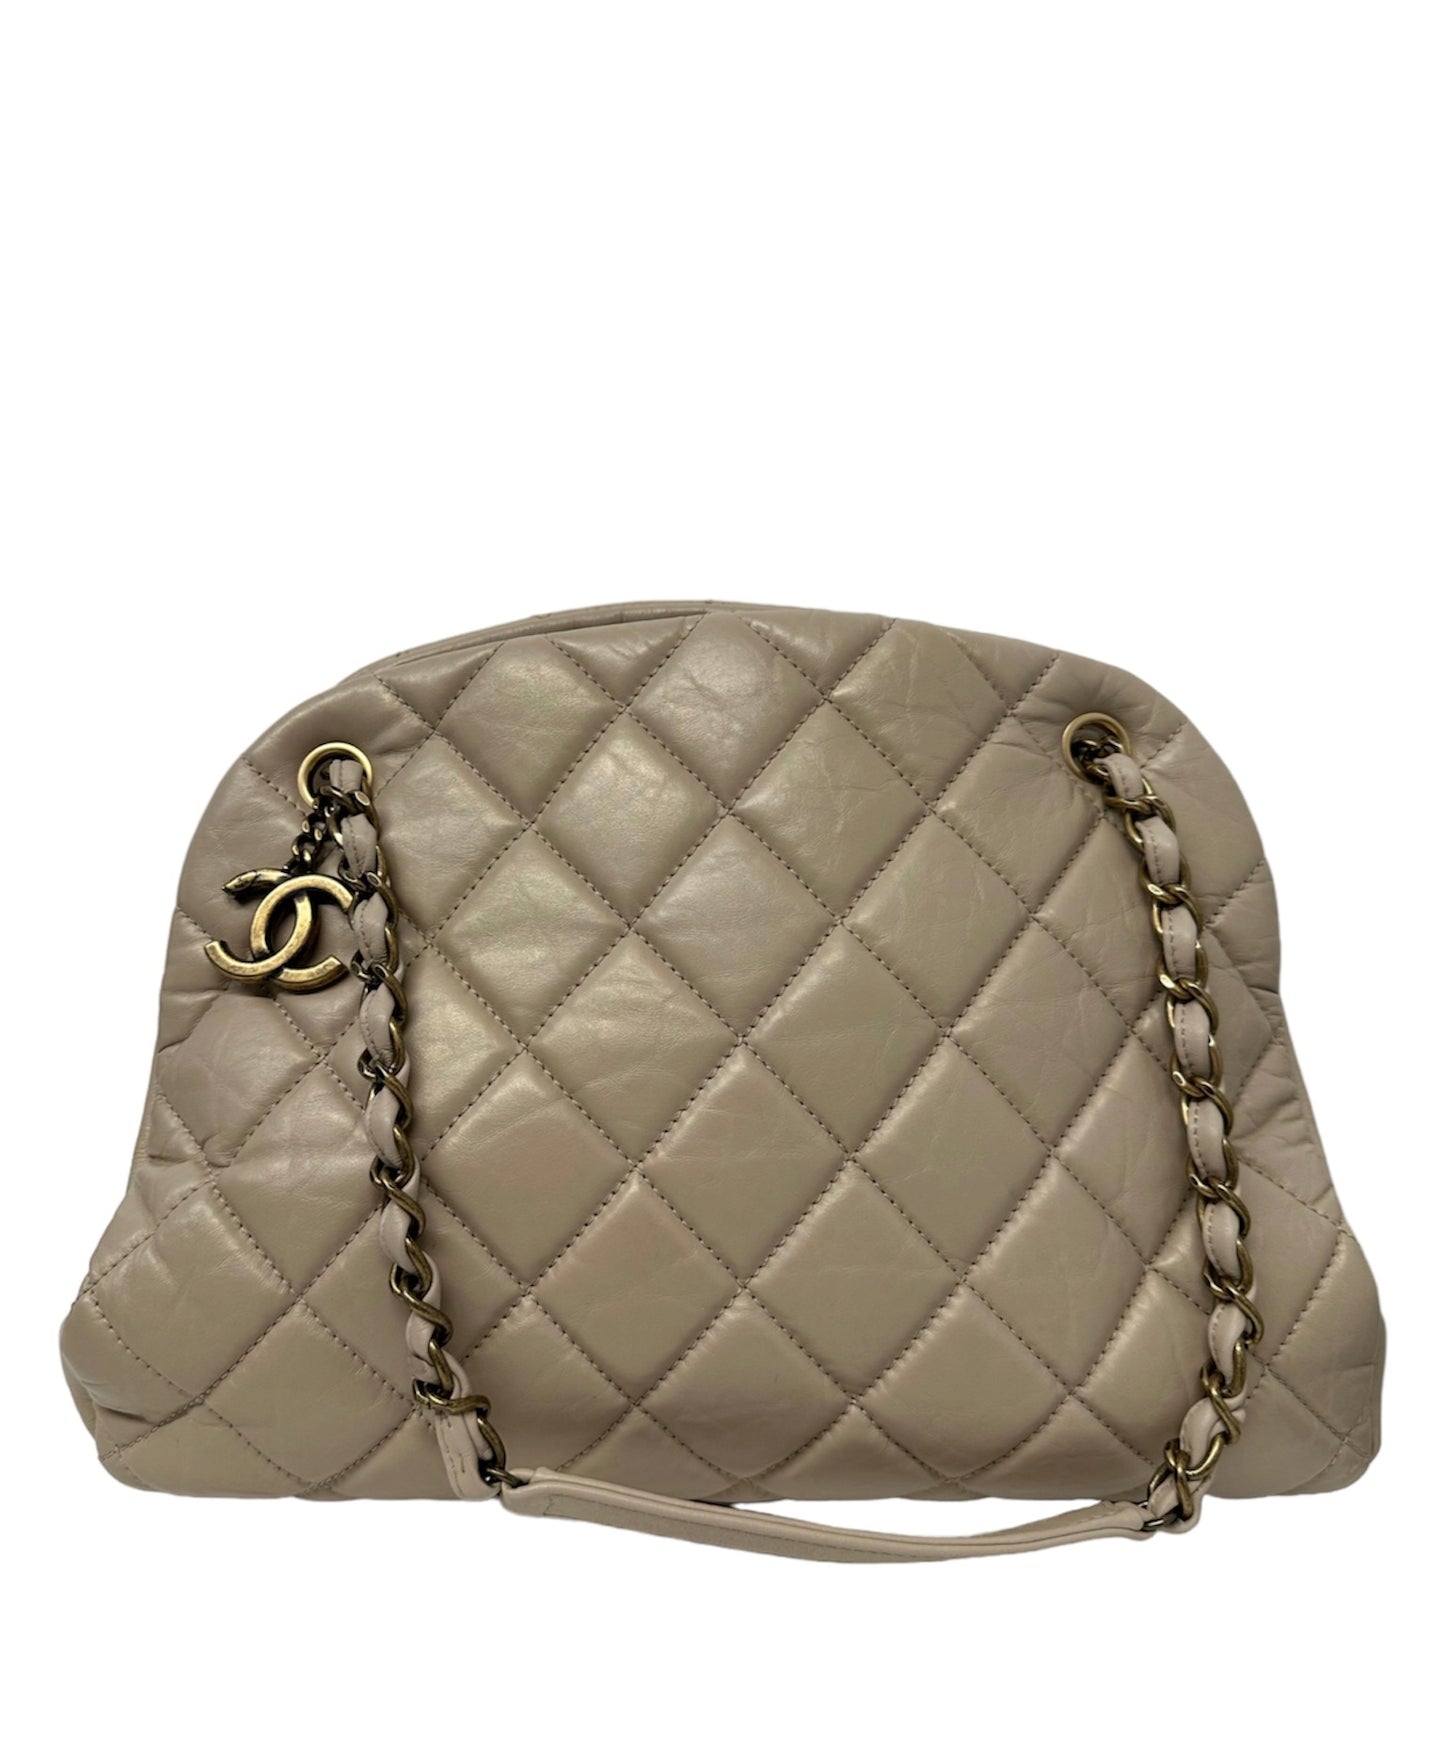 CHANEL - Beige Crinkled Leather Large Mademoiselle Just Bowling Bag